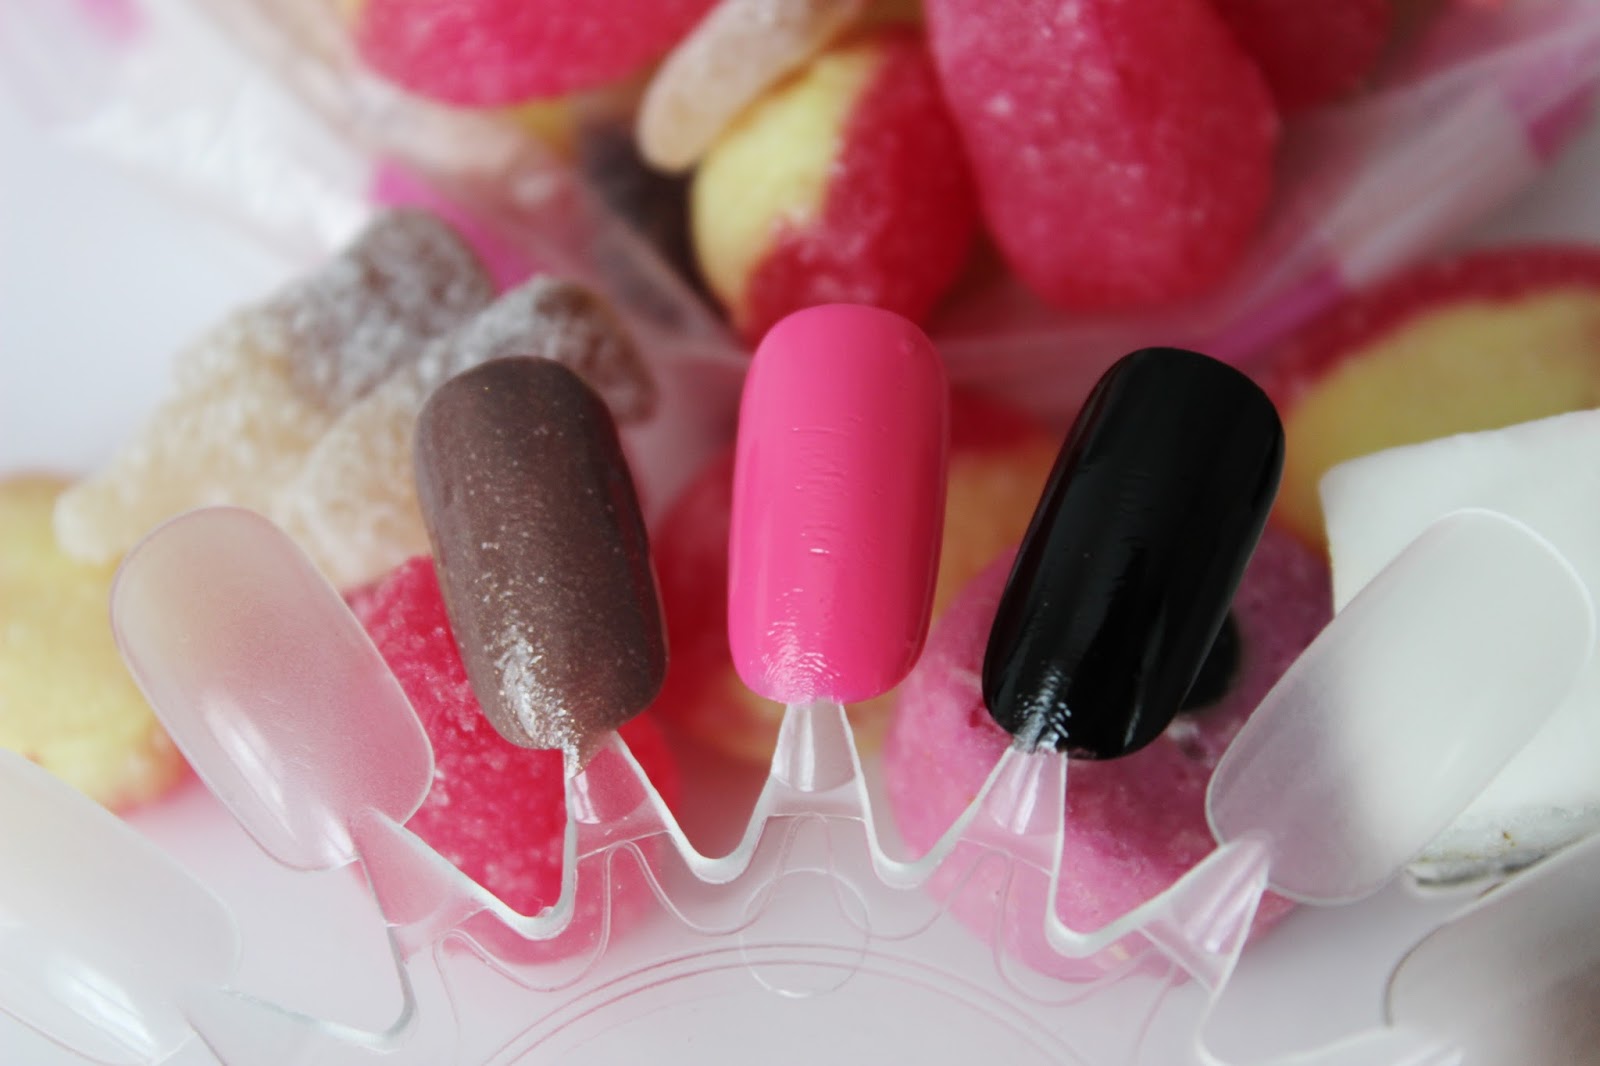 Models Own sweet shop scented nail polishes: fizzy cola bottles, gumball and liquorice allsorts swatches